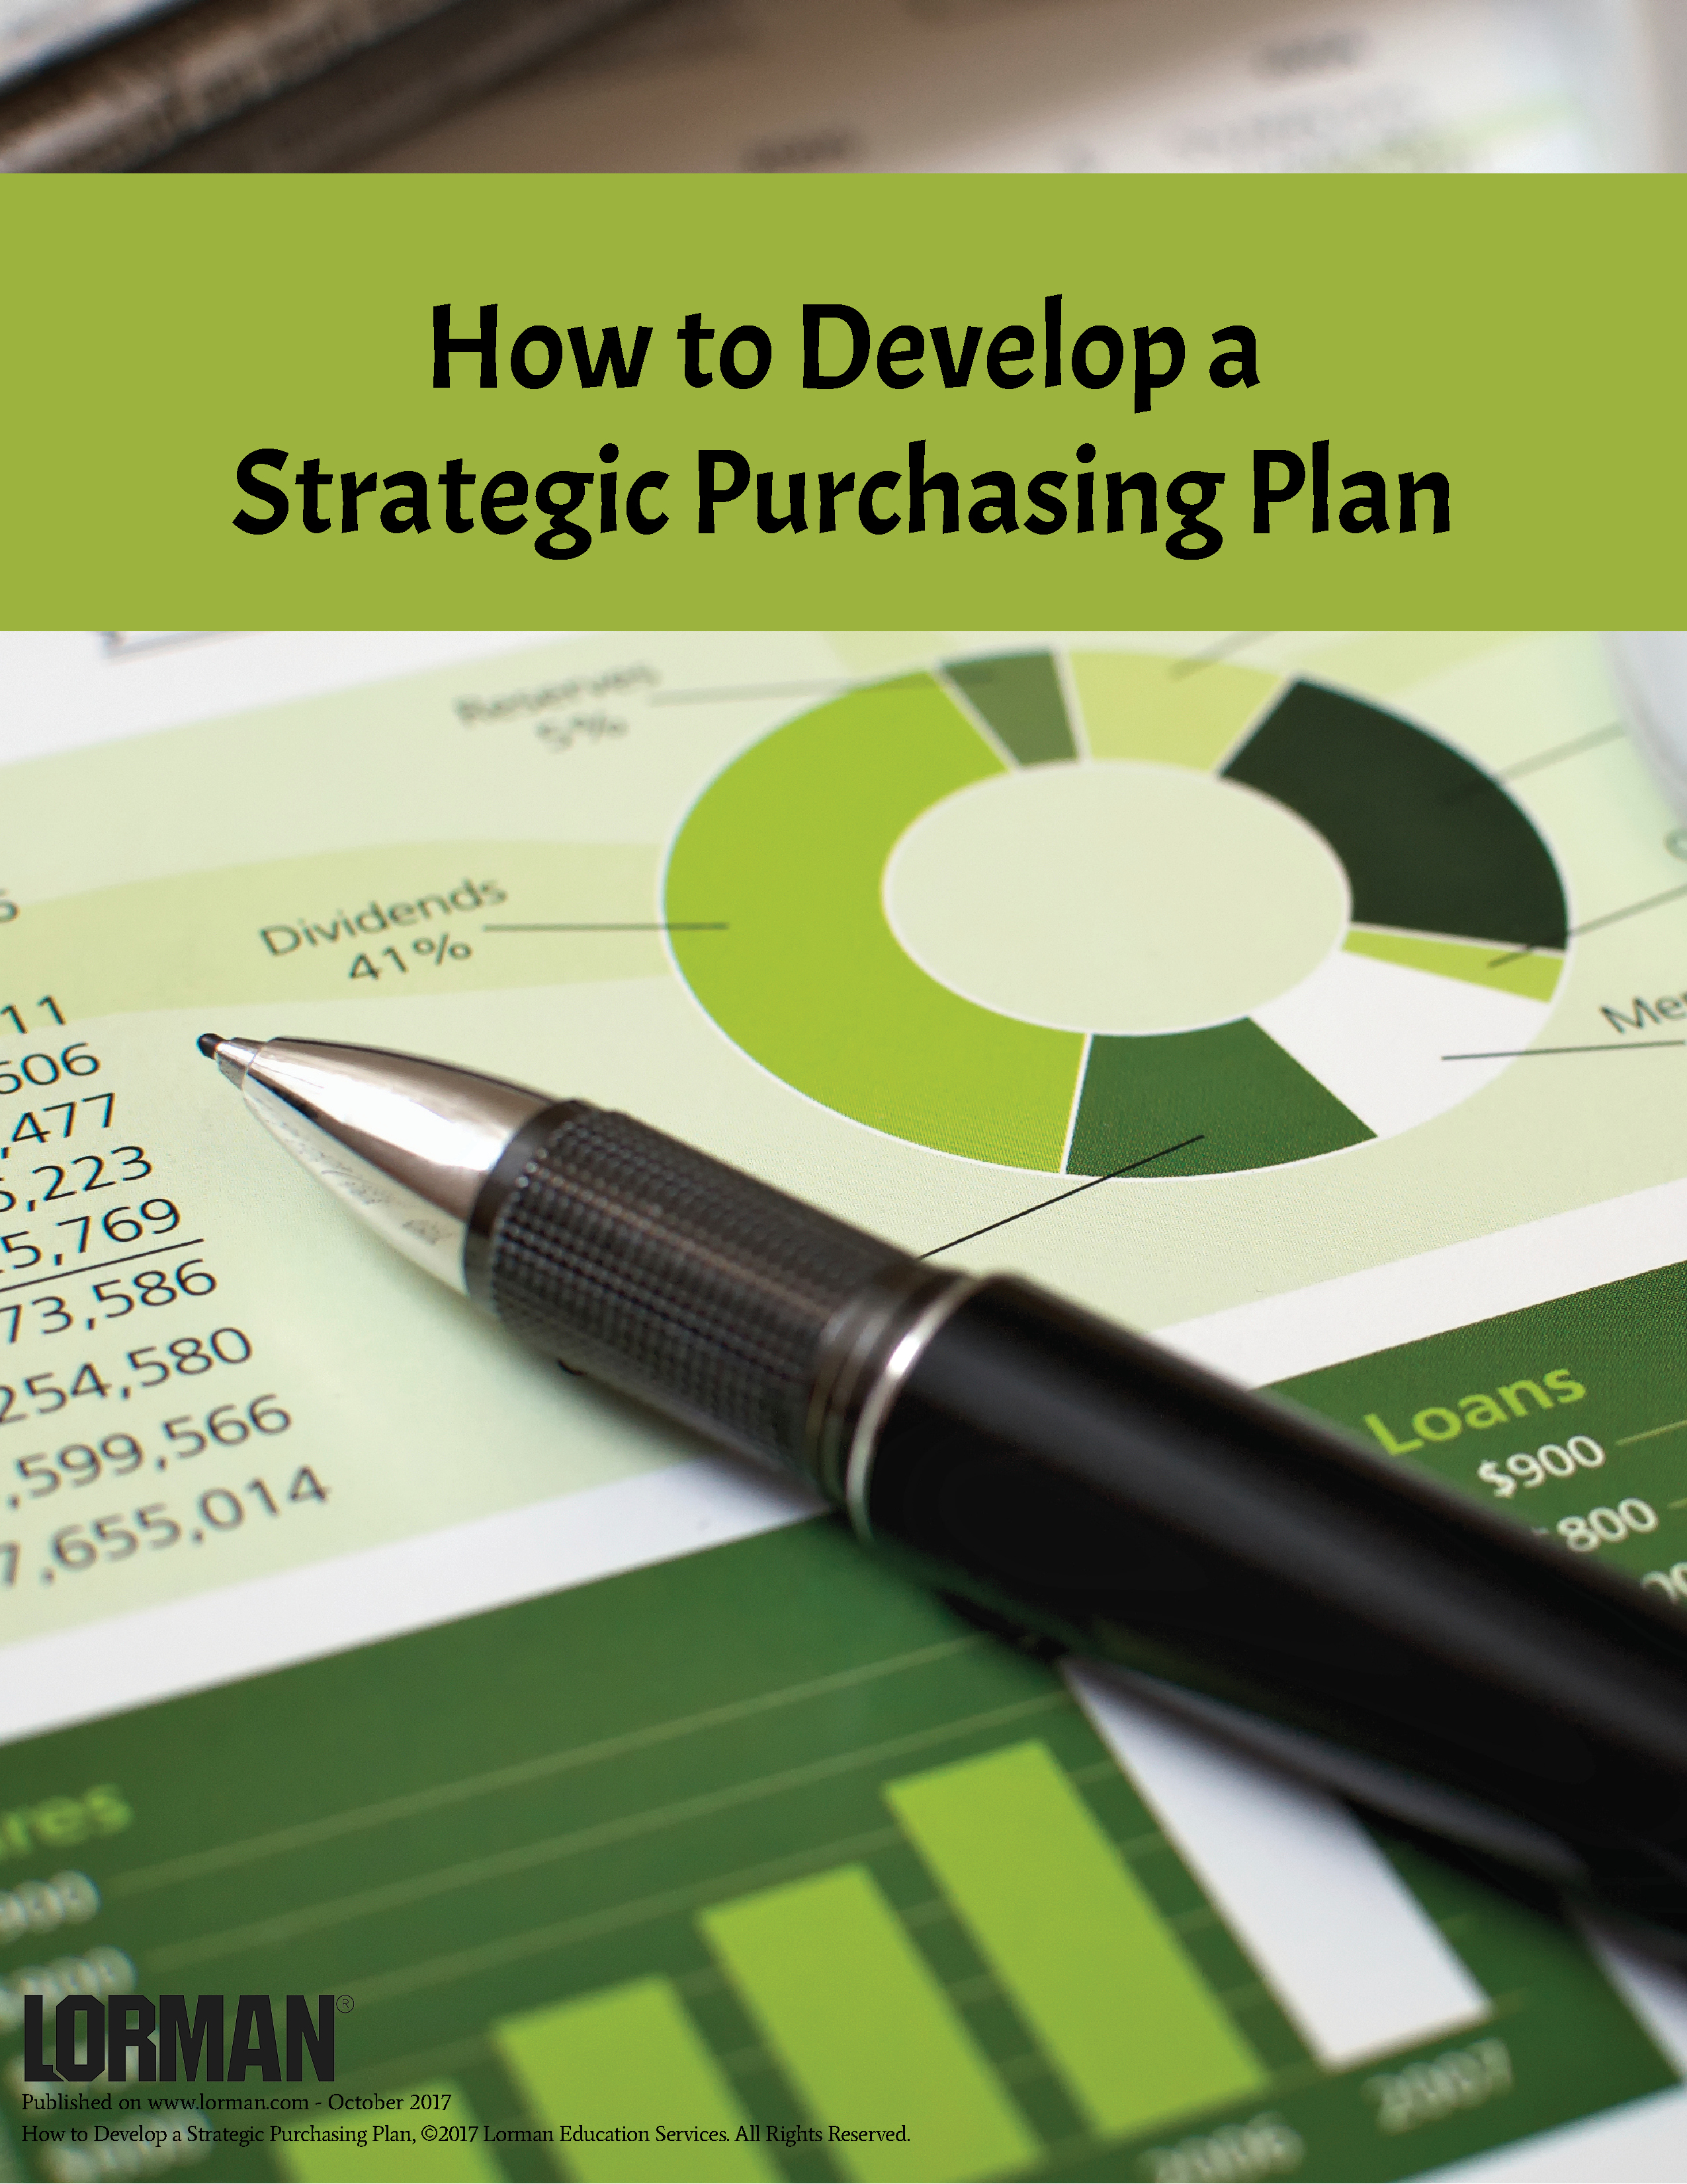 How to Develop a Strategic Purchasing Plan